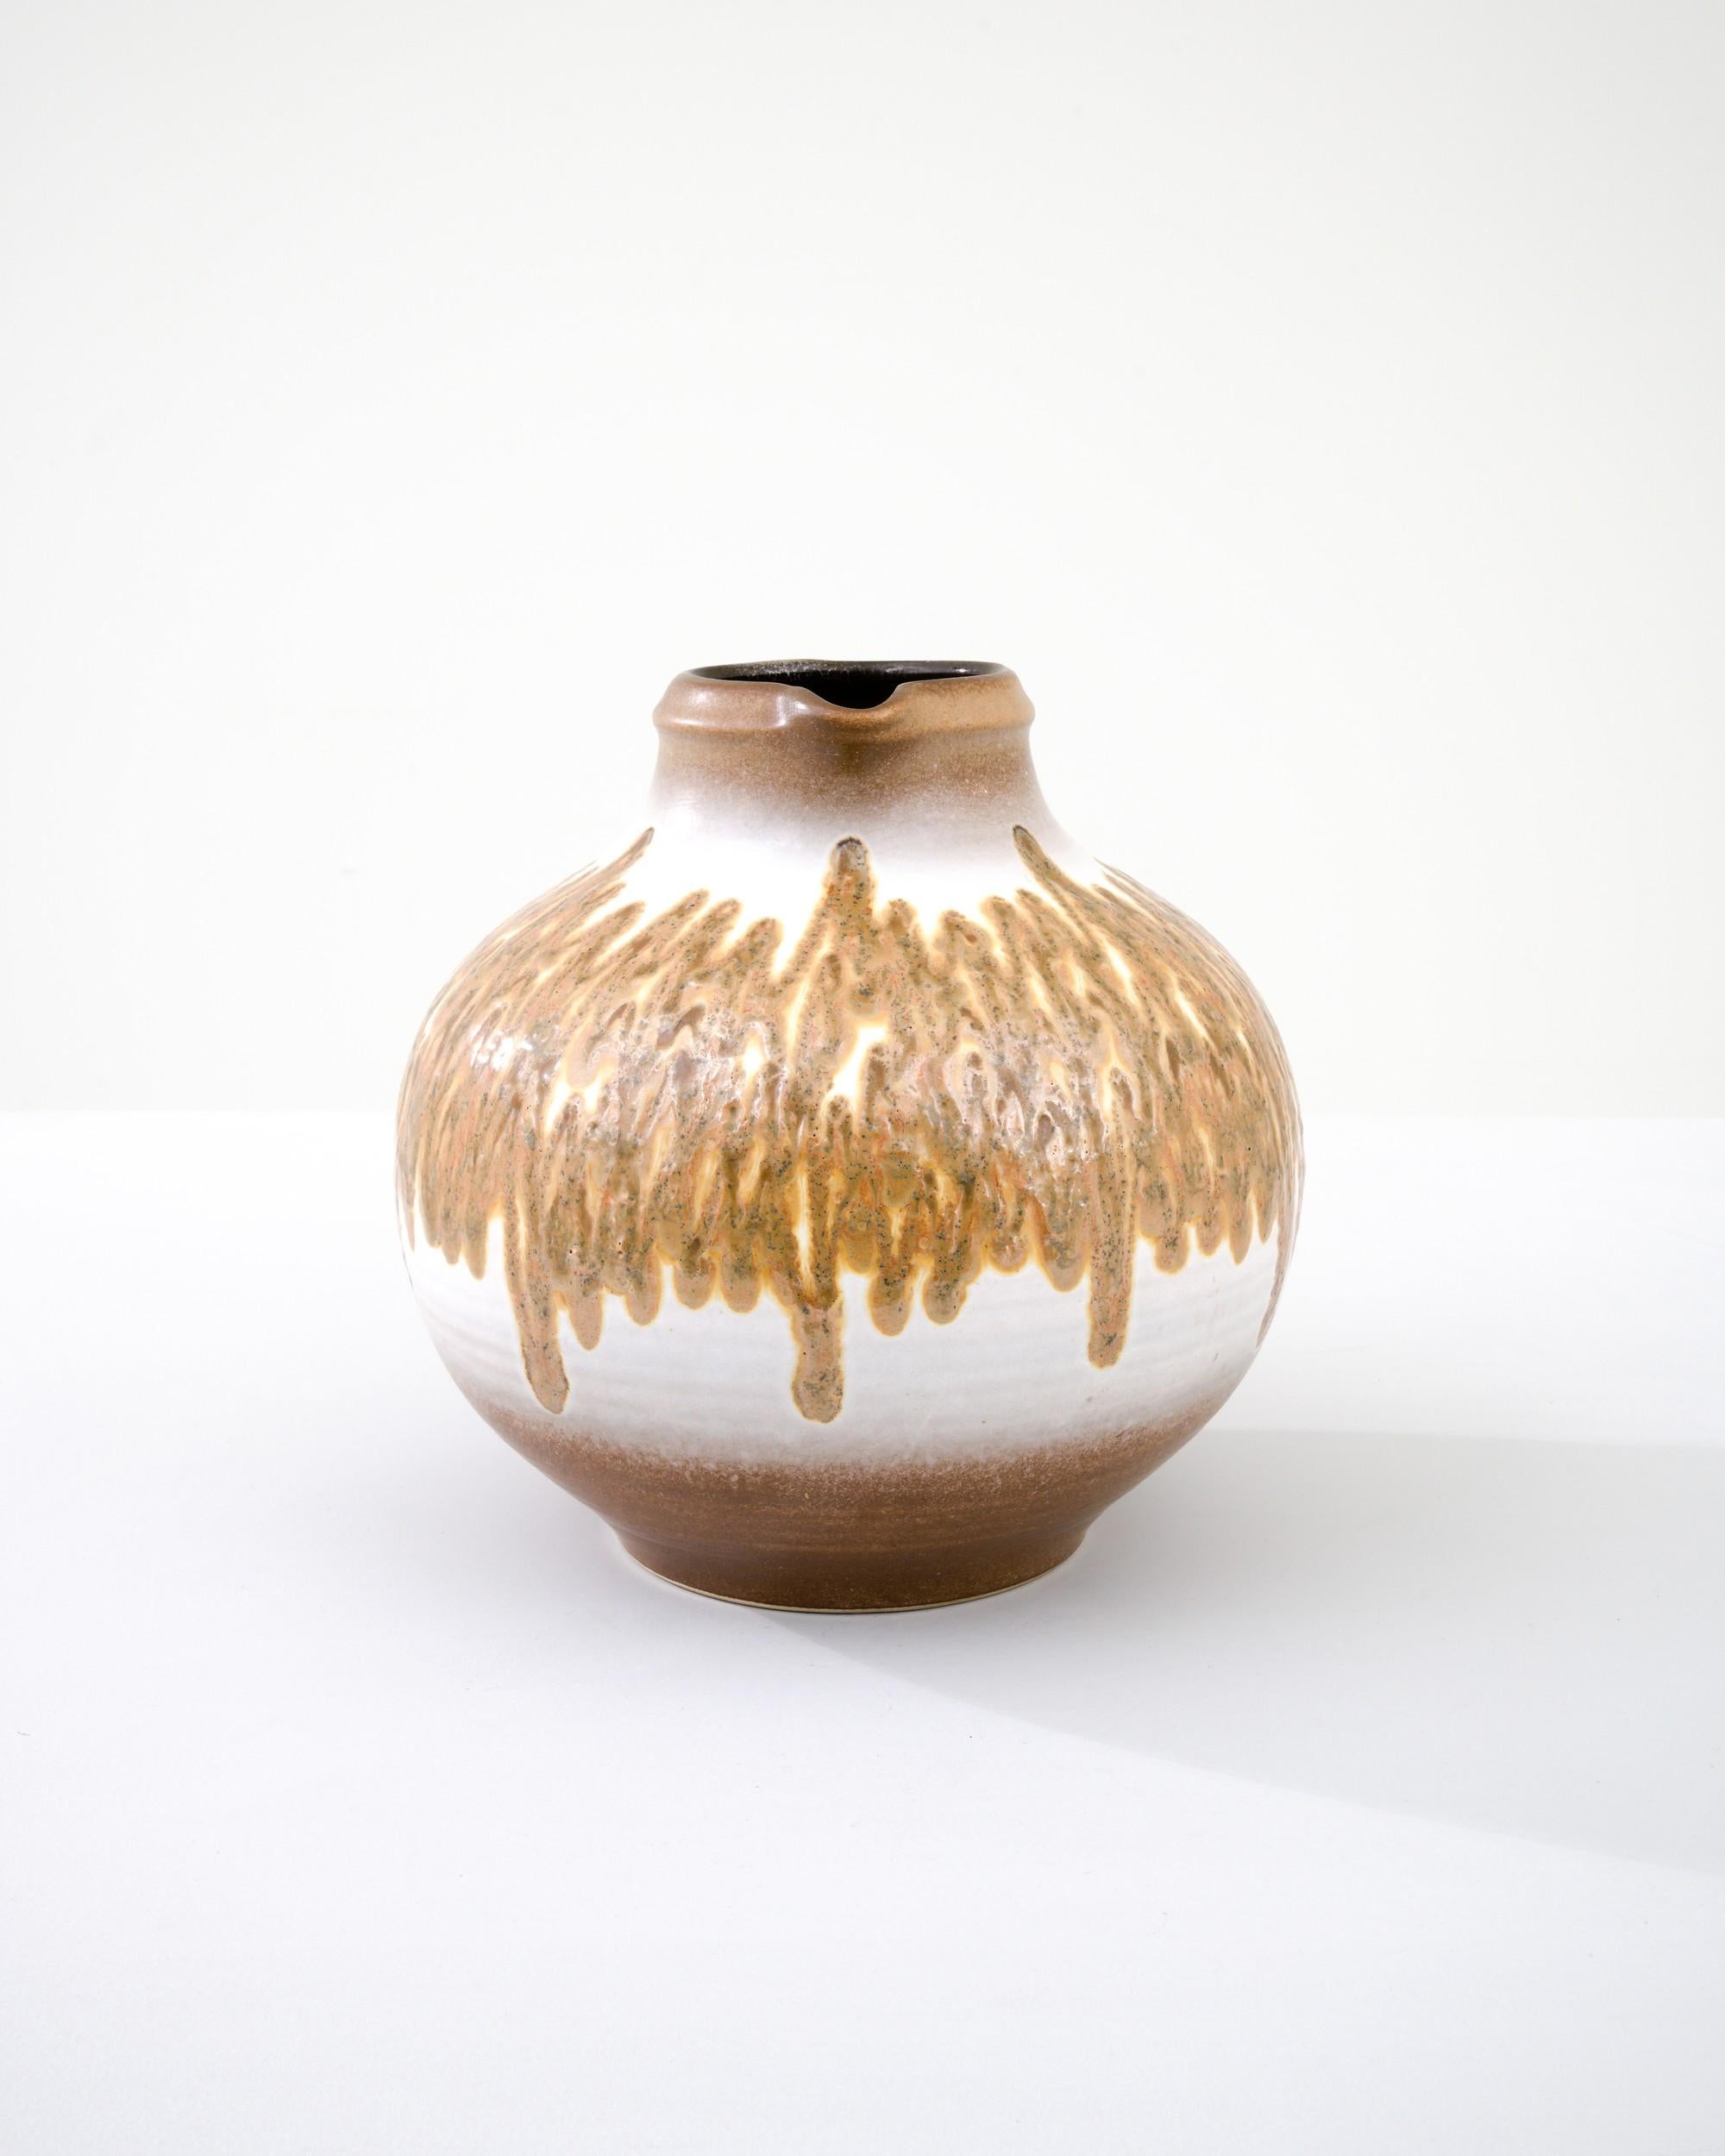 A ceramic vase from mid-20th century Germany. Neither large nor small, this studio made pot reflects the hand-held, and the handmade; the tactility of process and the artist's vision– realized on the potter’s wheel. A palette of ochres and umbres